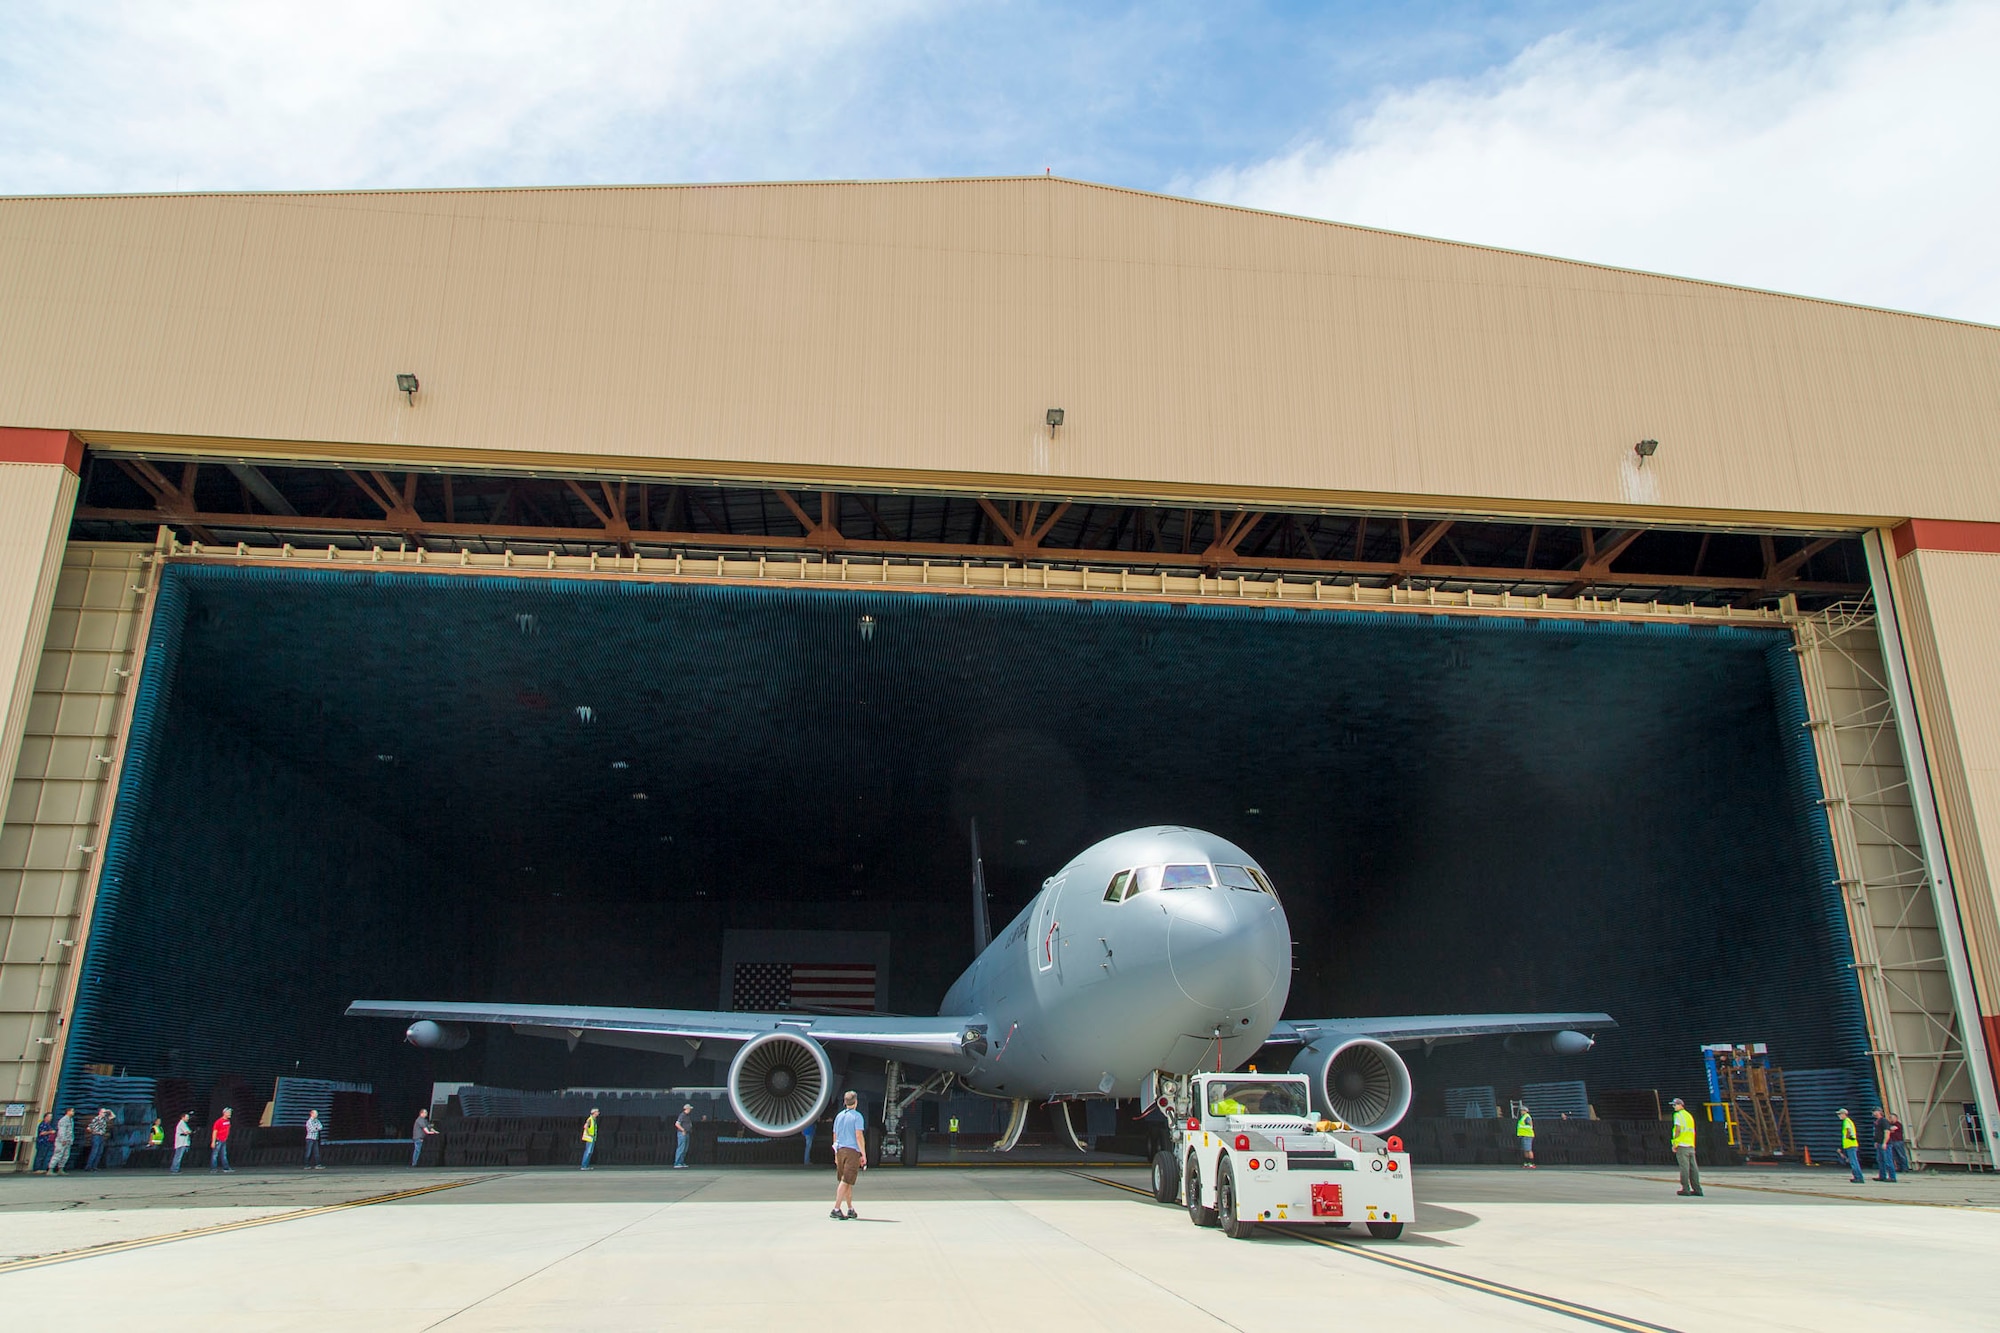 A KC-46A Pegasus is moved into the Benefield Anechoic Facility May 5. The BAF at Edwards is the largest anechoic chamber in the world and can fit most aircraft inside. (U.S. Air Force photo by Christopher Okula)